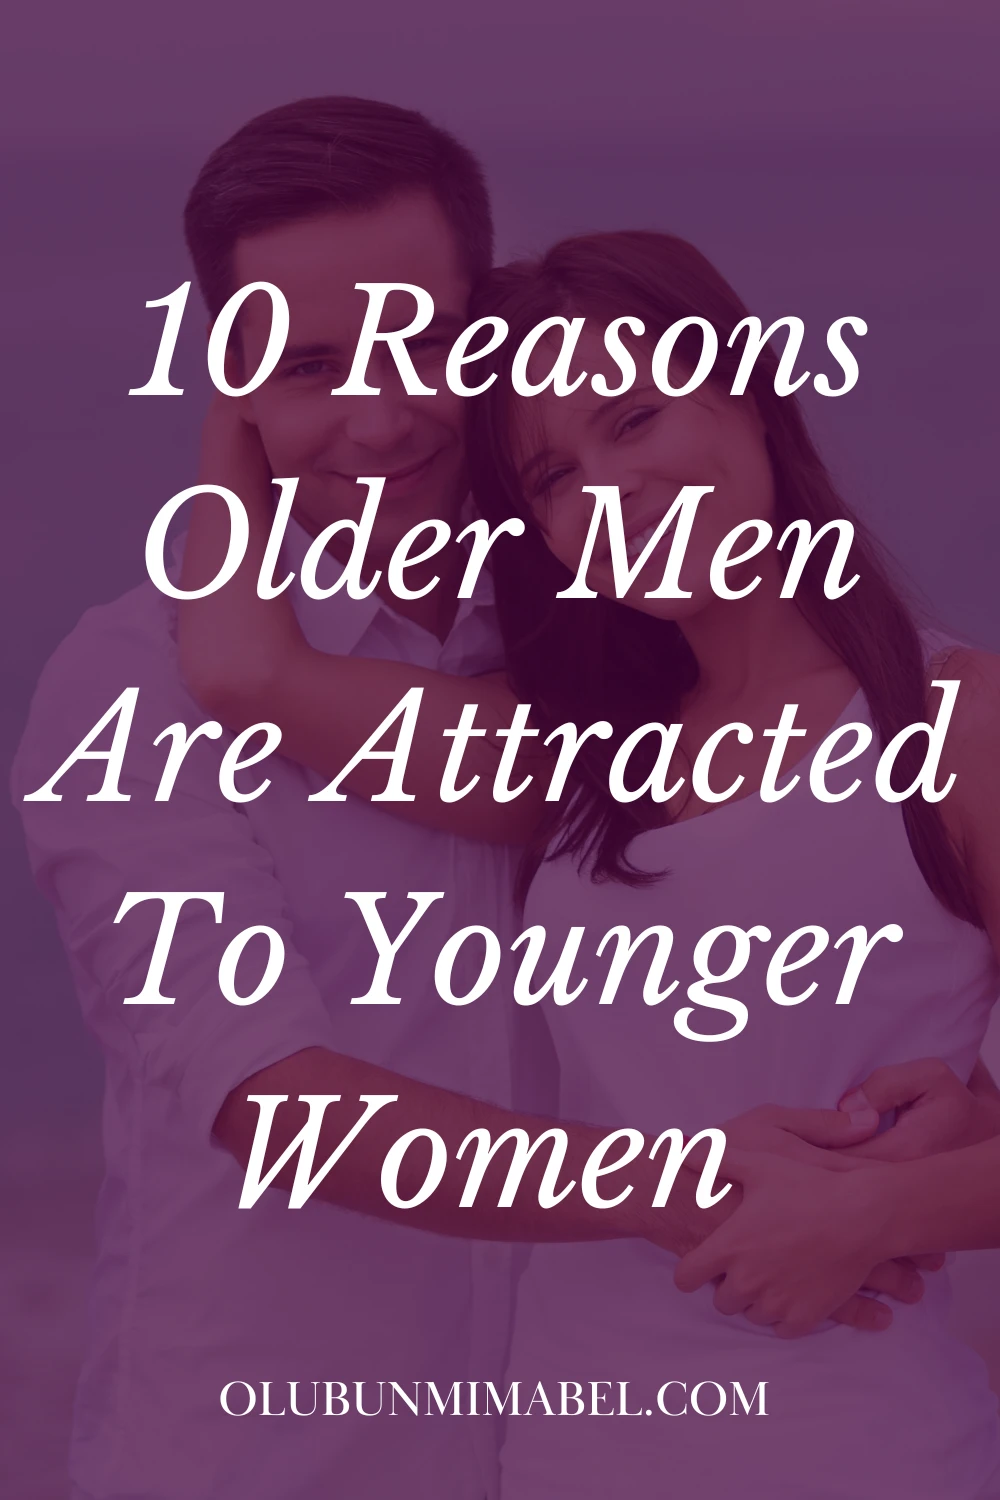 What Attracts An Older Man To a Younger Woman?